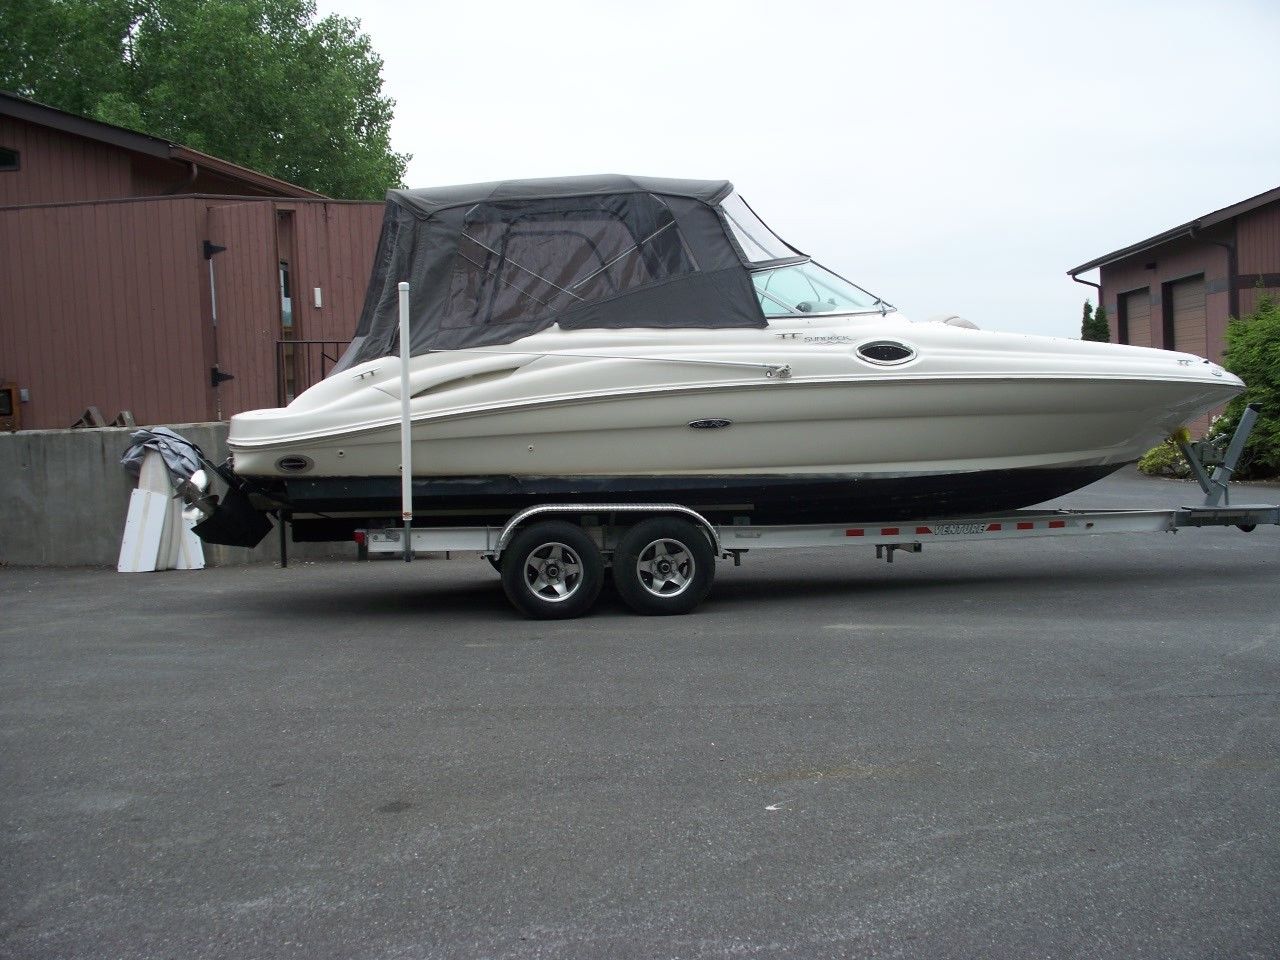 Sea Ray Sundeck 270 2004 for sale for $28,000 - Boats-from ...